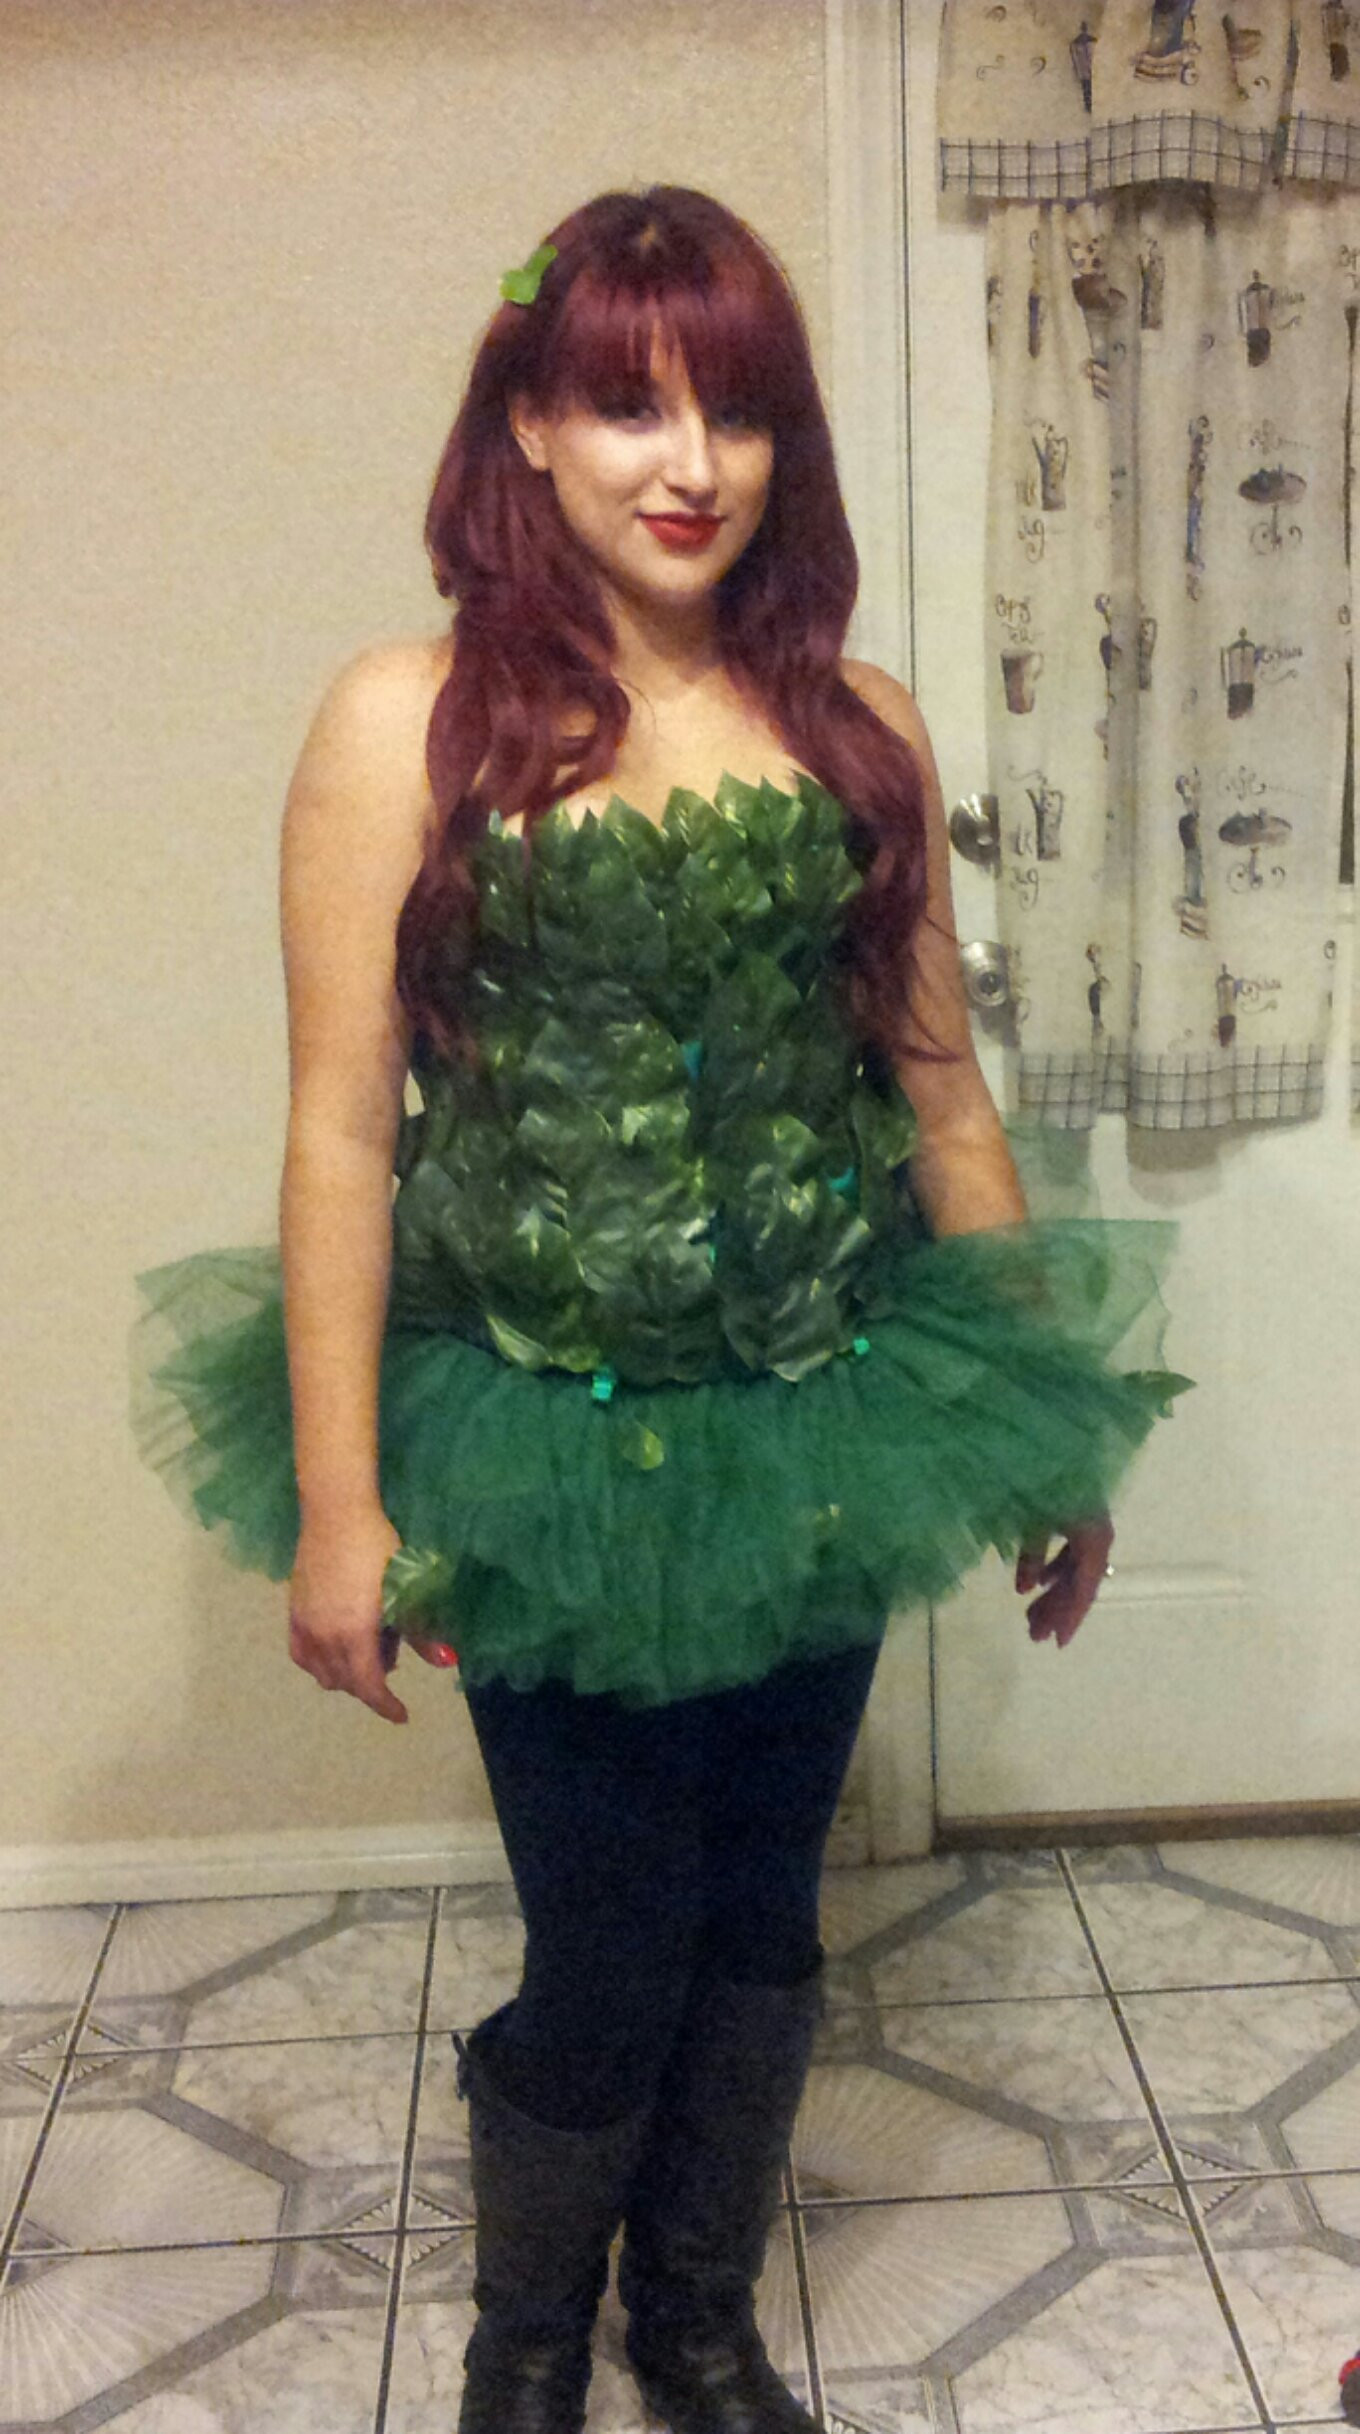 Poison Ivy Costume DIY
 How to make a Poison Ivy Halloween Costume